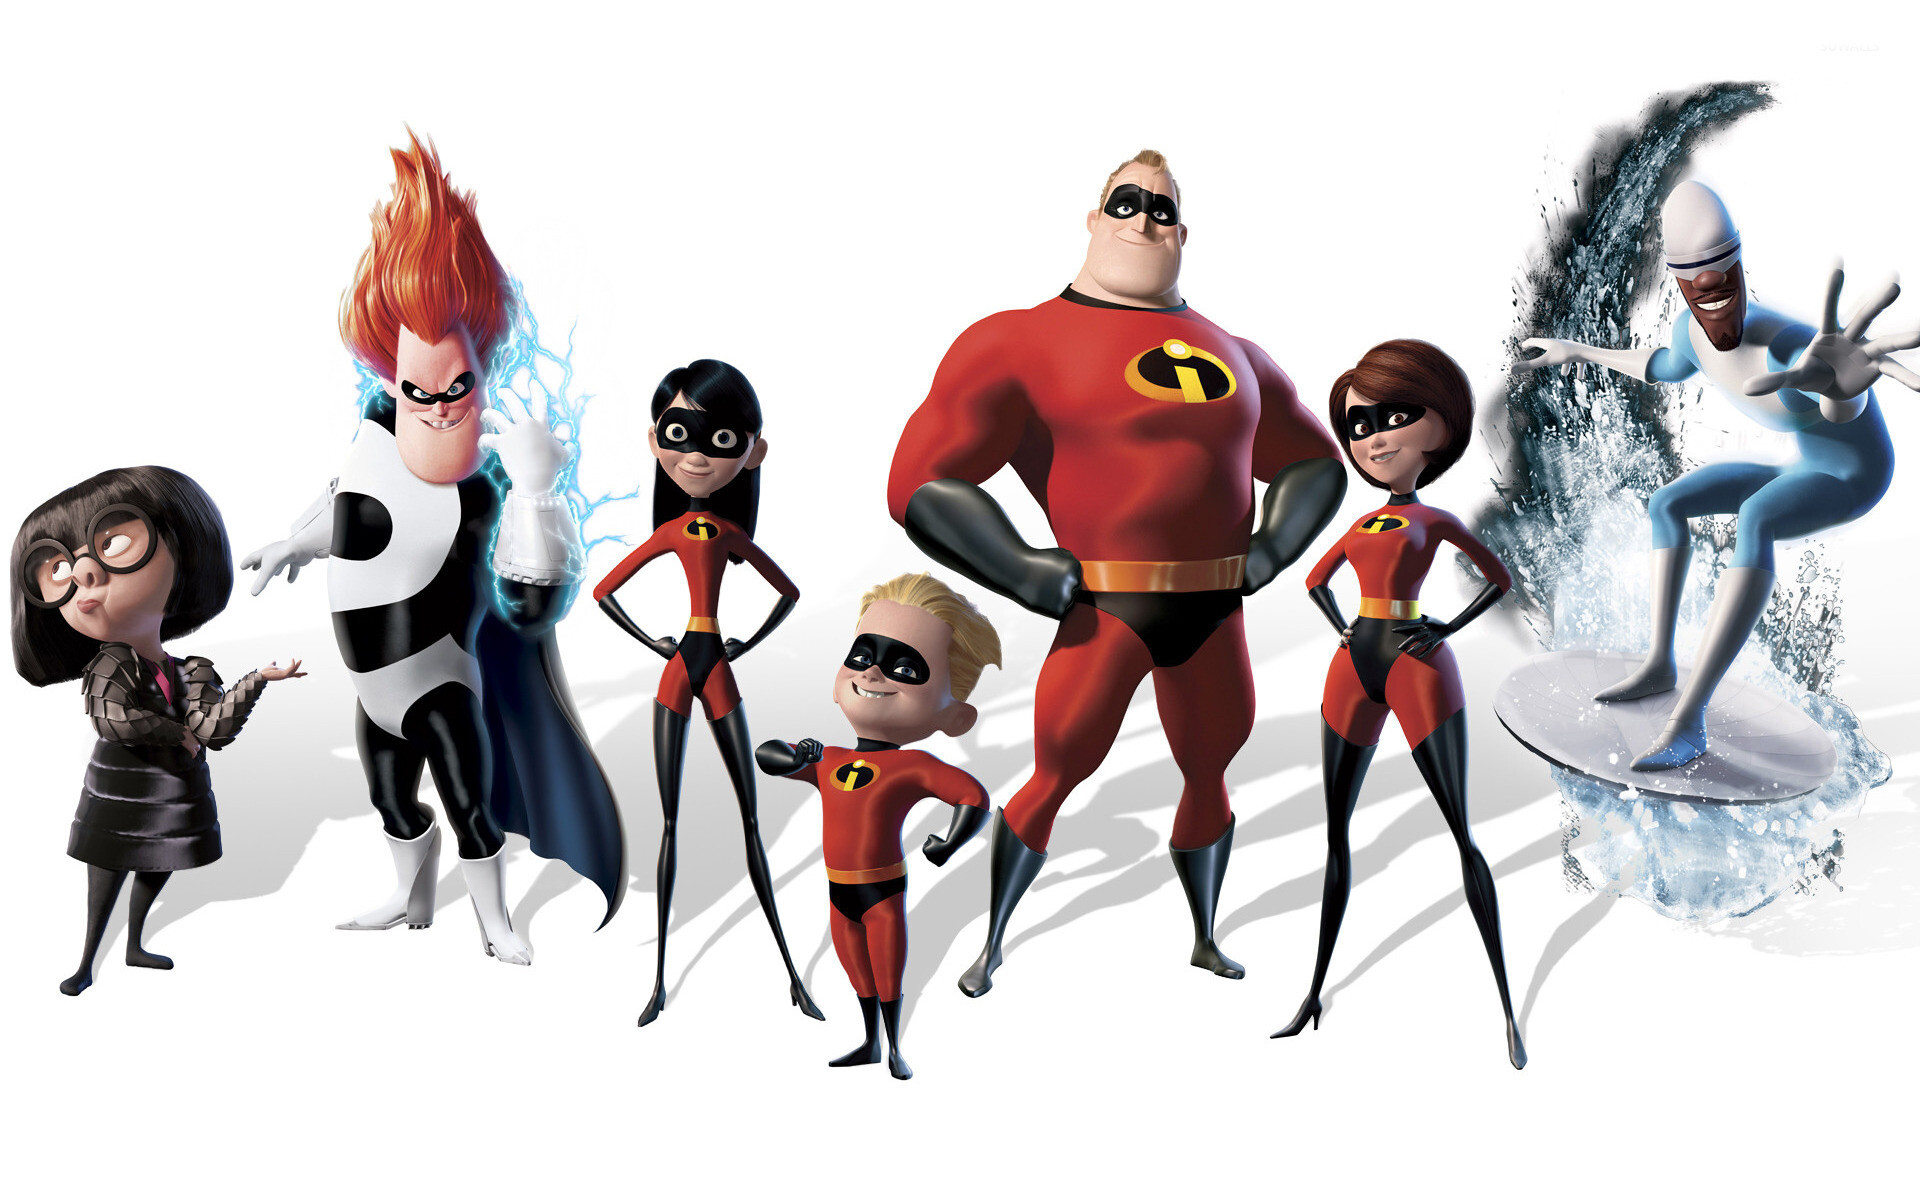 The Incredibles: Michael Giacchino composed the film's orchestral score. 1920x1200 HD Background.